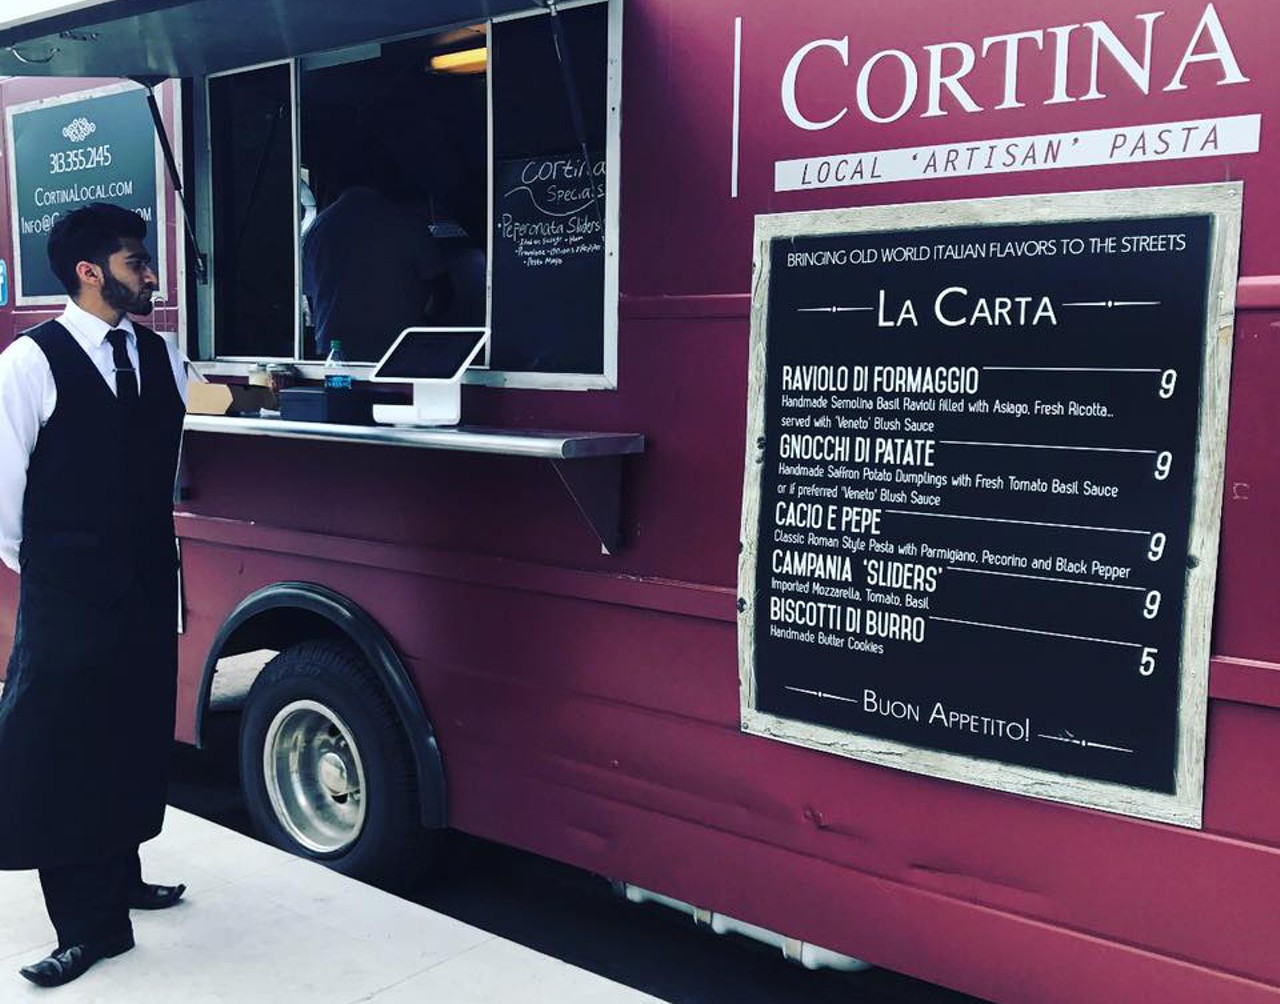 Cortina Local ‘Artisan’ Pasta
cortinalocal.com
This food truck serves up authentic Italian pasta dishes. We especially dig the sharply dressed maître d’.